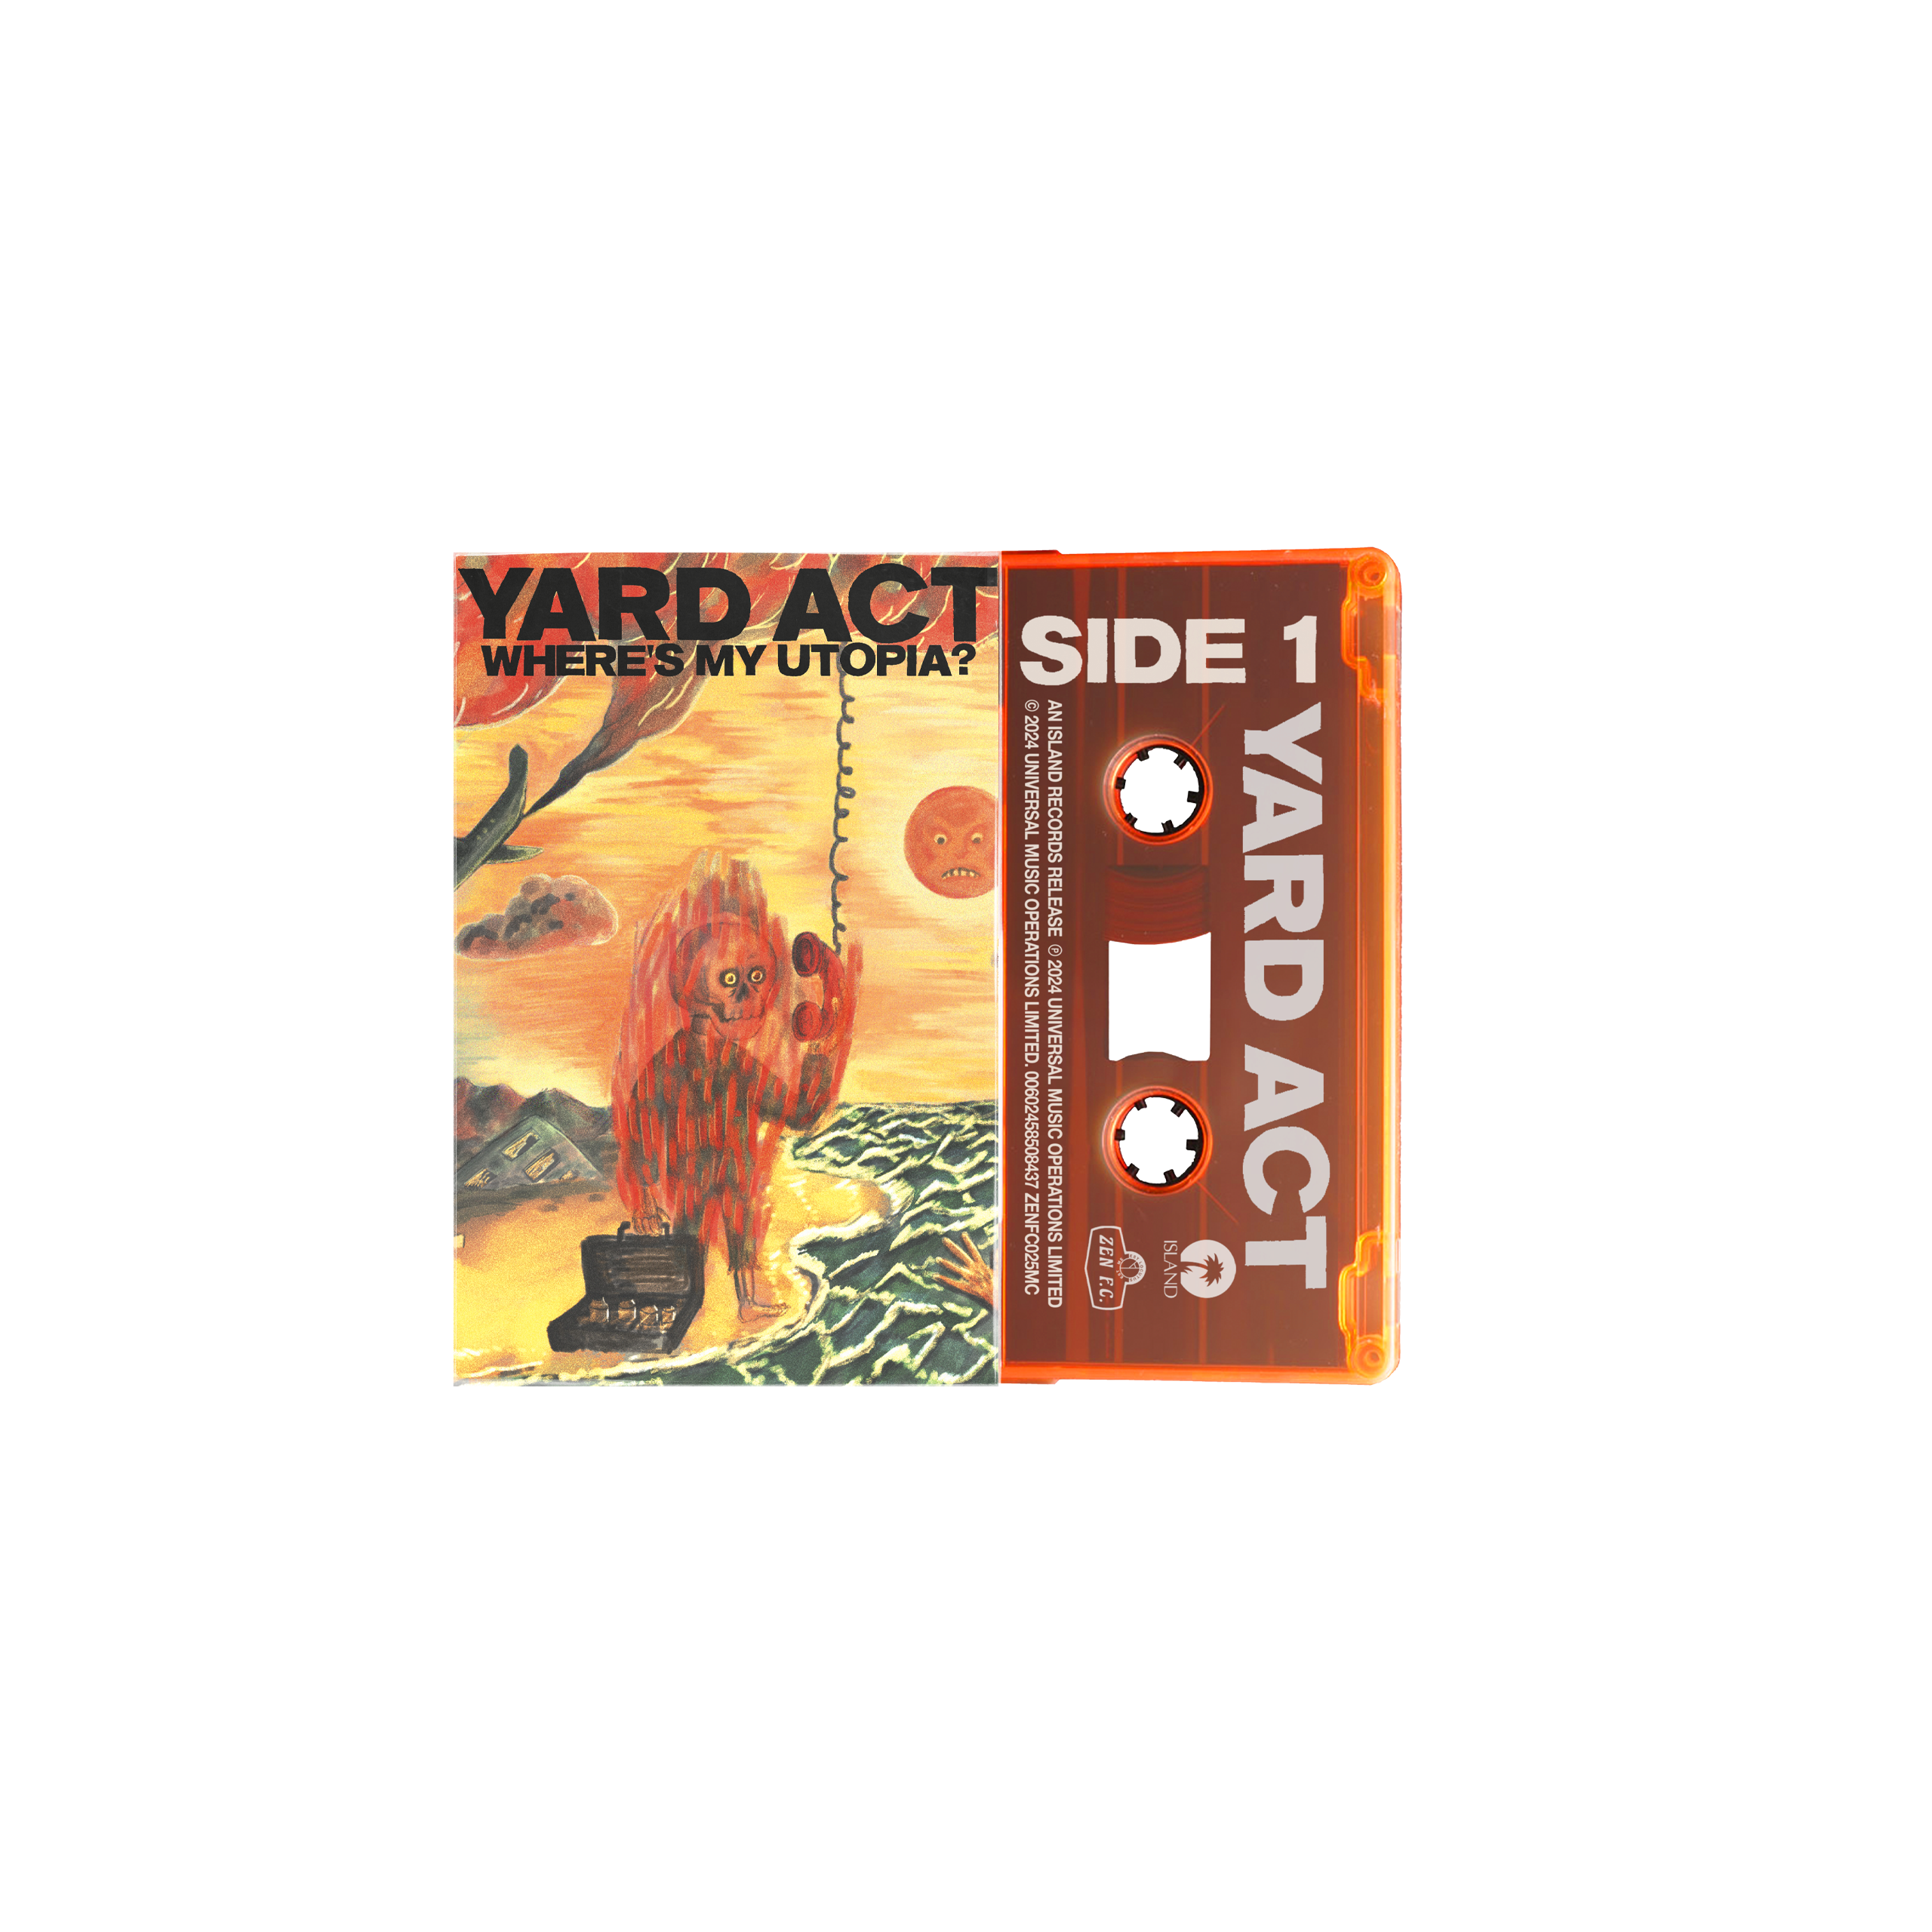 Yard Act - Where’s My Utopia?: Limited Edition Orange Cassette